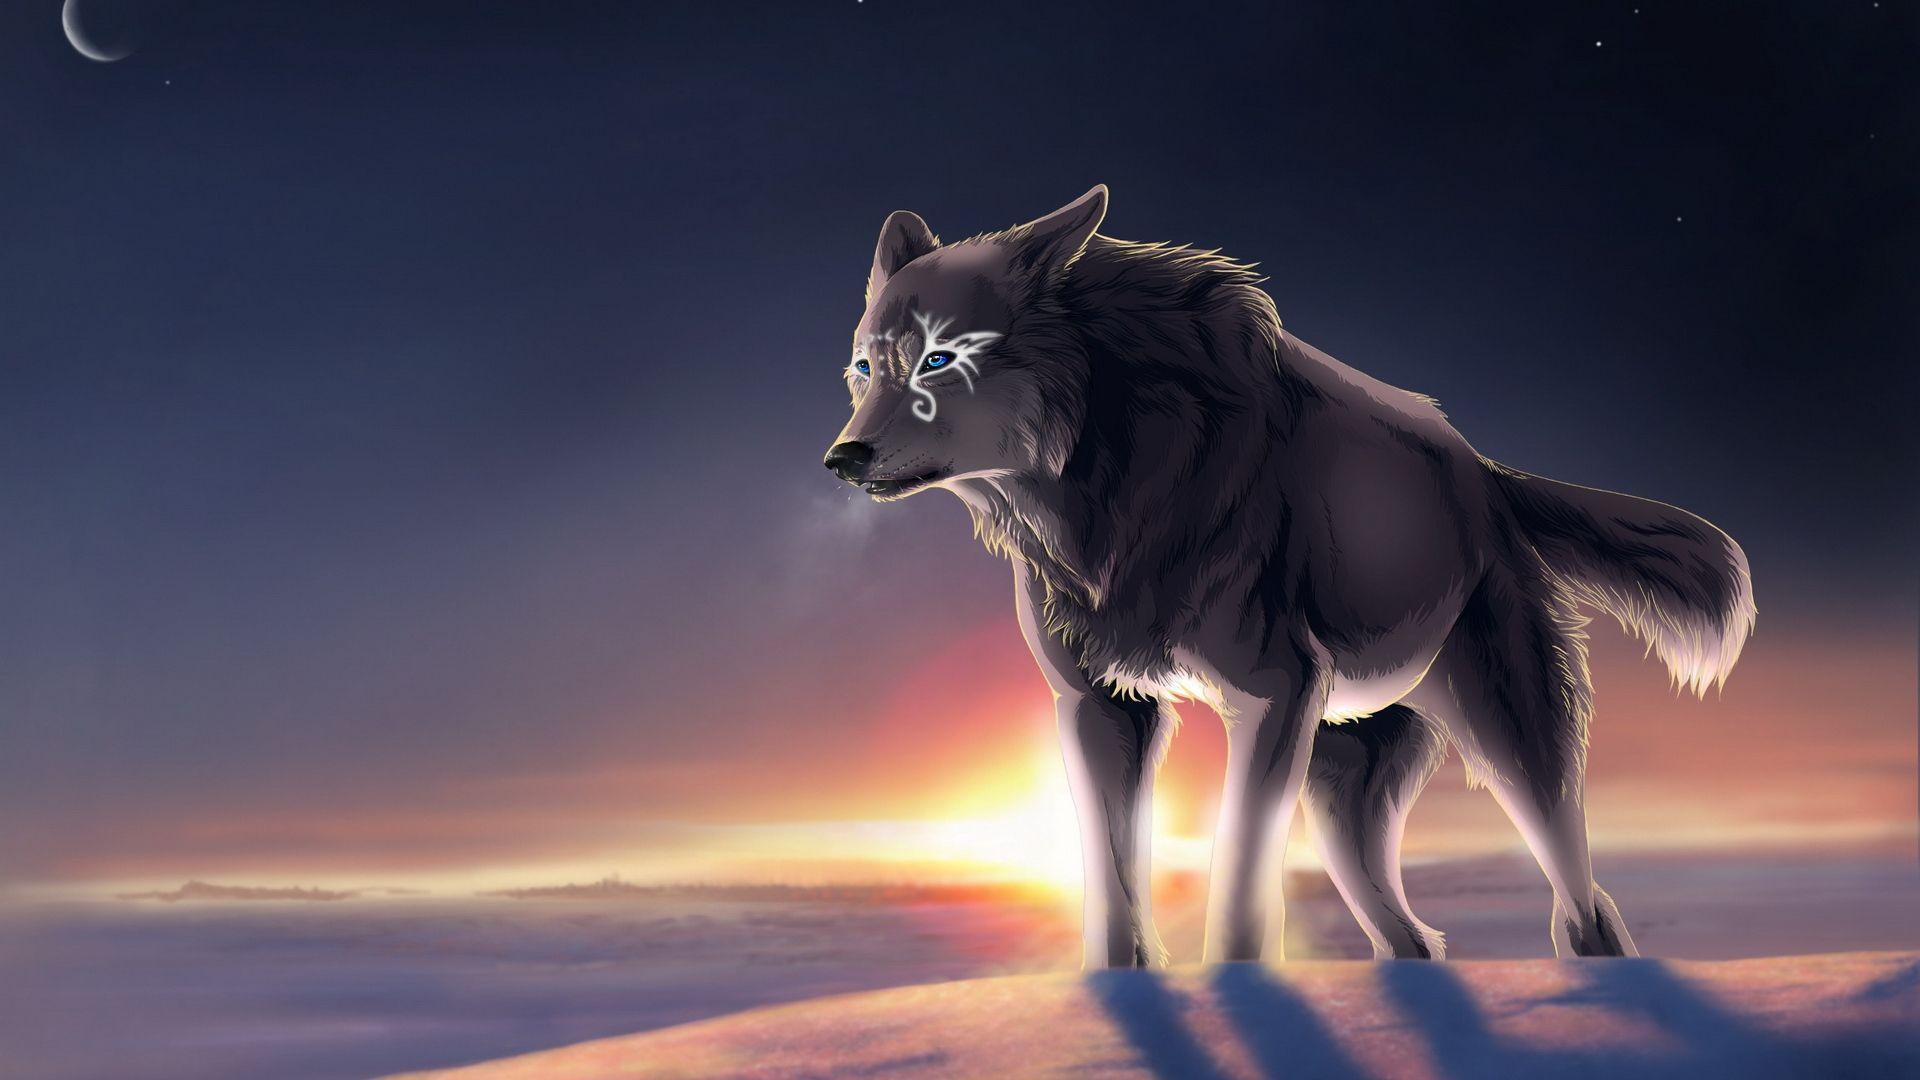 Wolf Wallpapers 1920x1080 - Wallpaper Cave